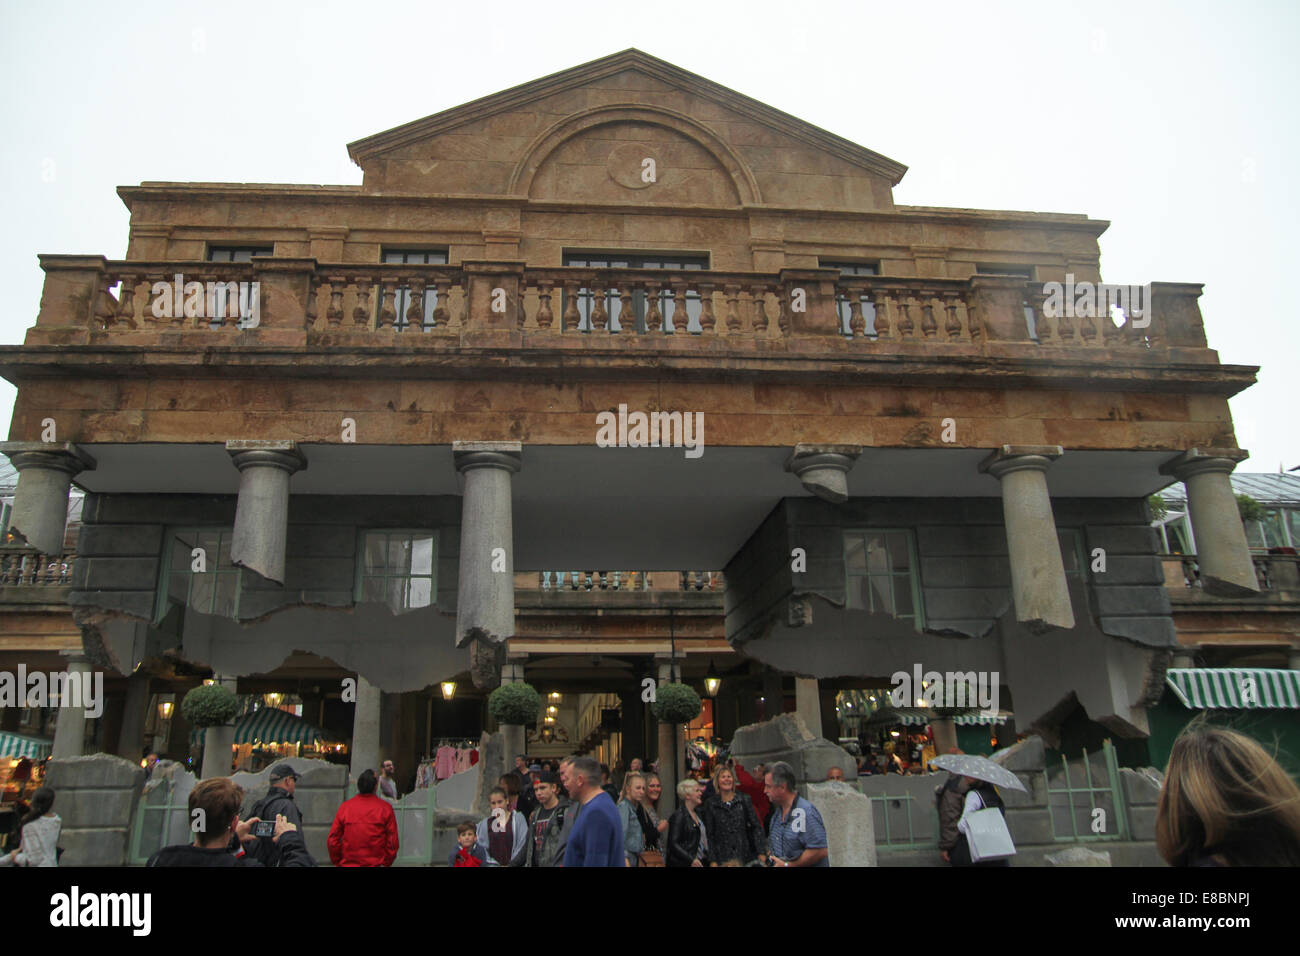 London, UK 4th October 2014.  Londoners seen admiring the levitating artwork at the Covent Garden piazza. The facade of the Market Building in the piazza at Covent Garden, London has been replicated as a drifting artwork by British artist Alex Chinneck. Photo by David Mbiyu/ Alamy Live News Stock Photo